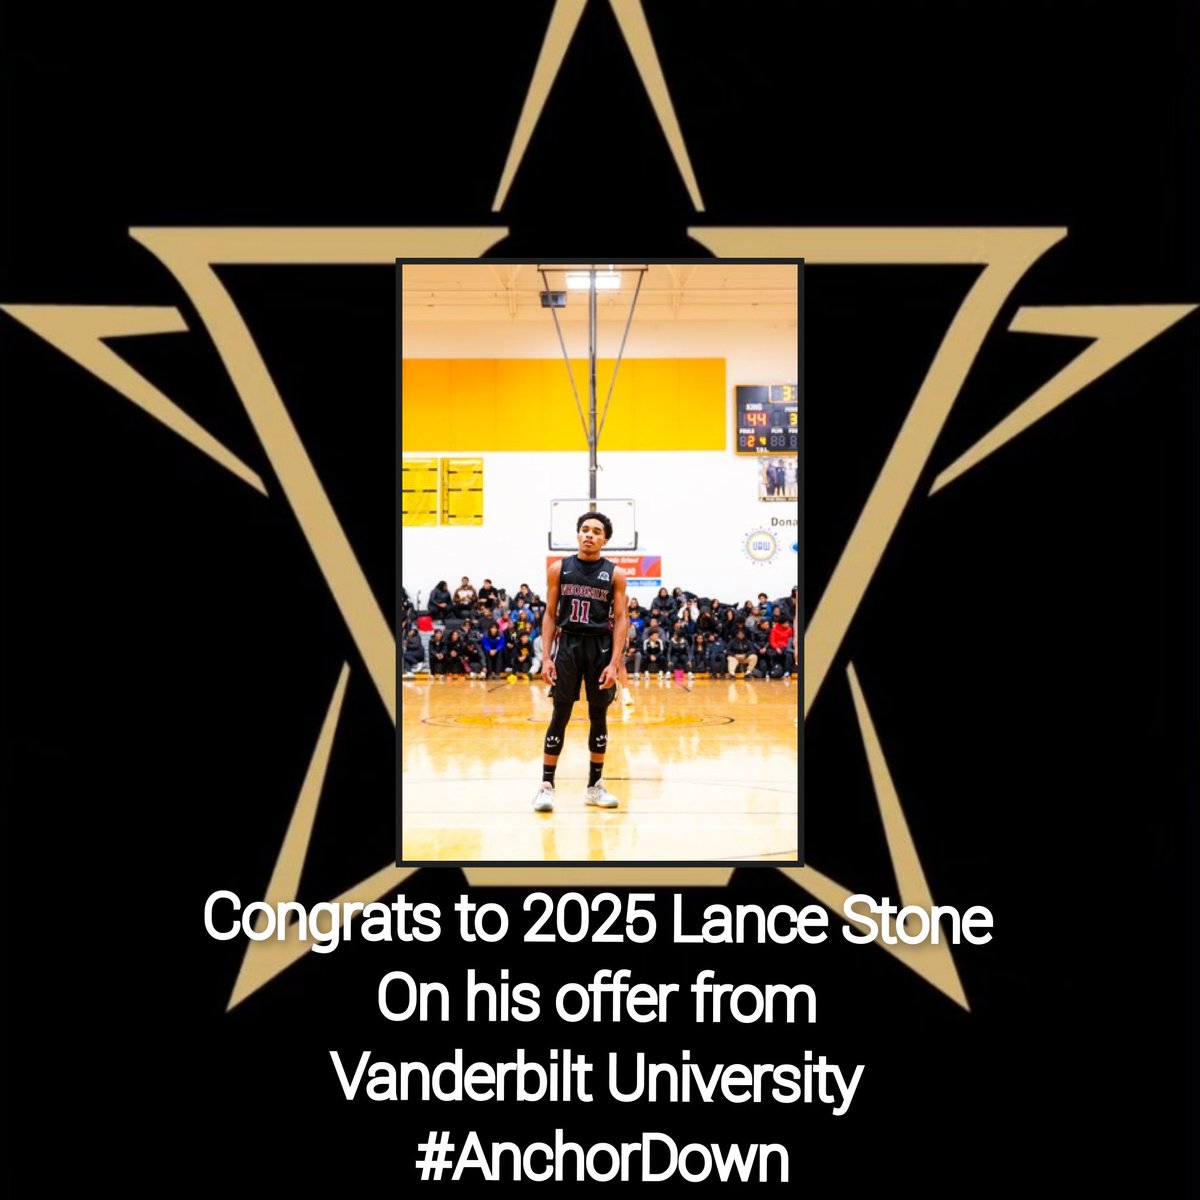 Congrats @shifty_Lance11 on your offer from @VandyMBB ⚓️⚓️⚓️⚓️⚓️ #RenniUnified #AnchorDown